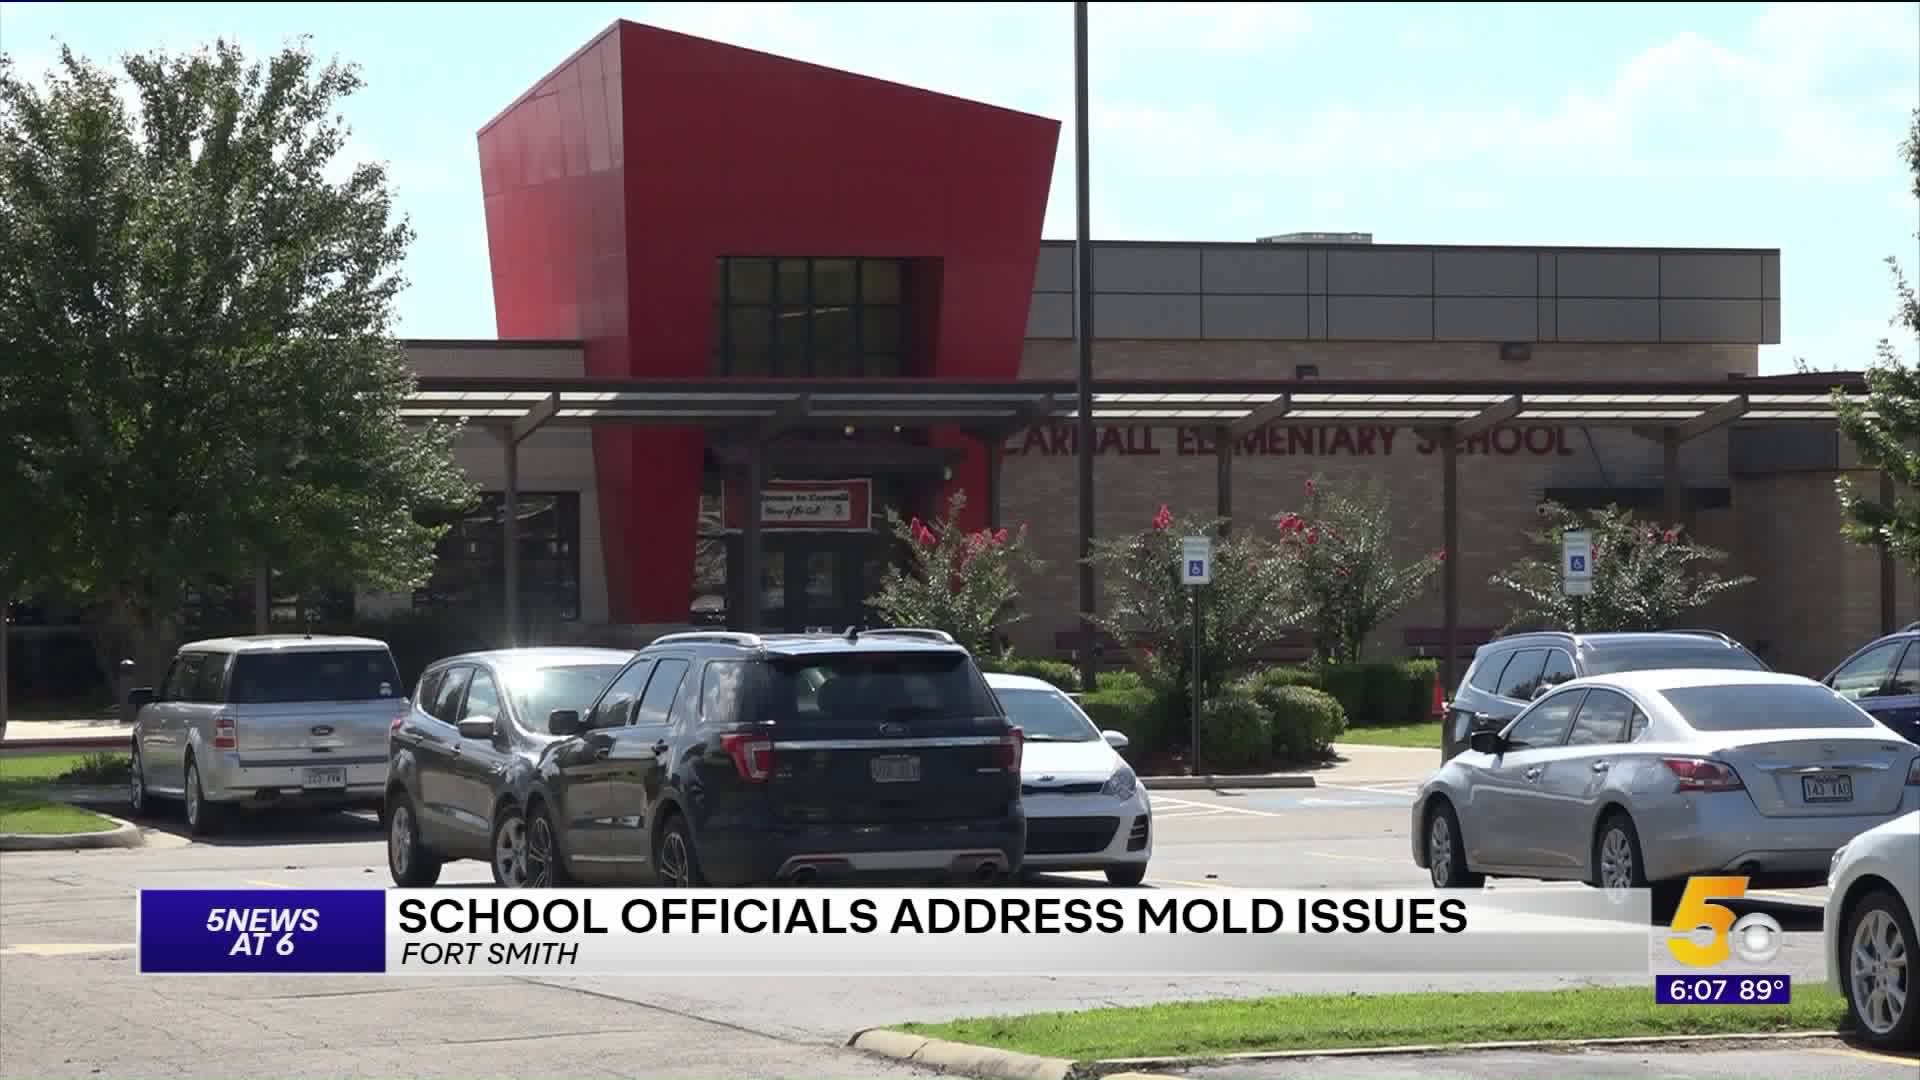 Fort Smith School Officials Address Mold Issues